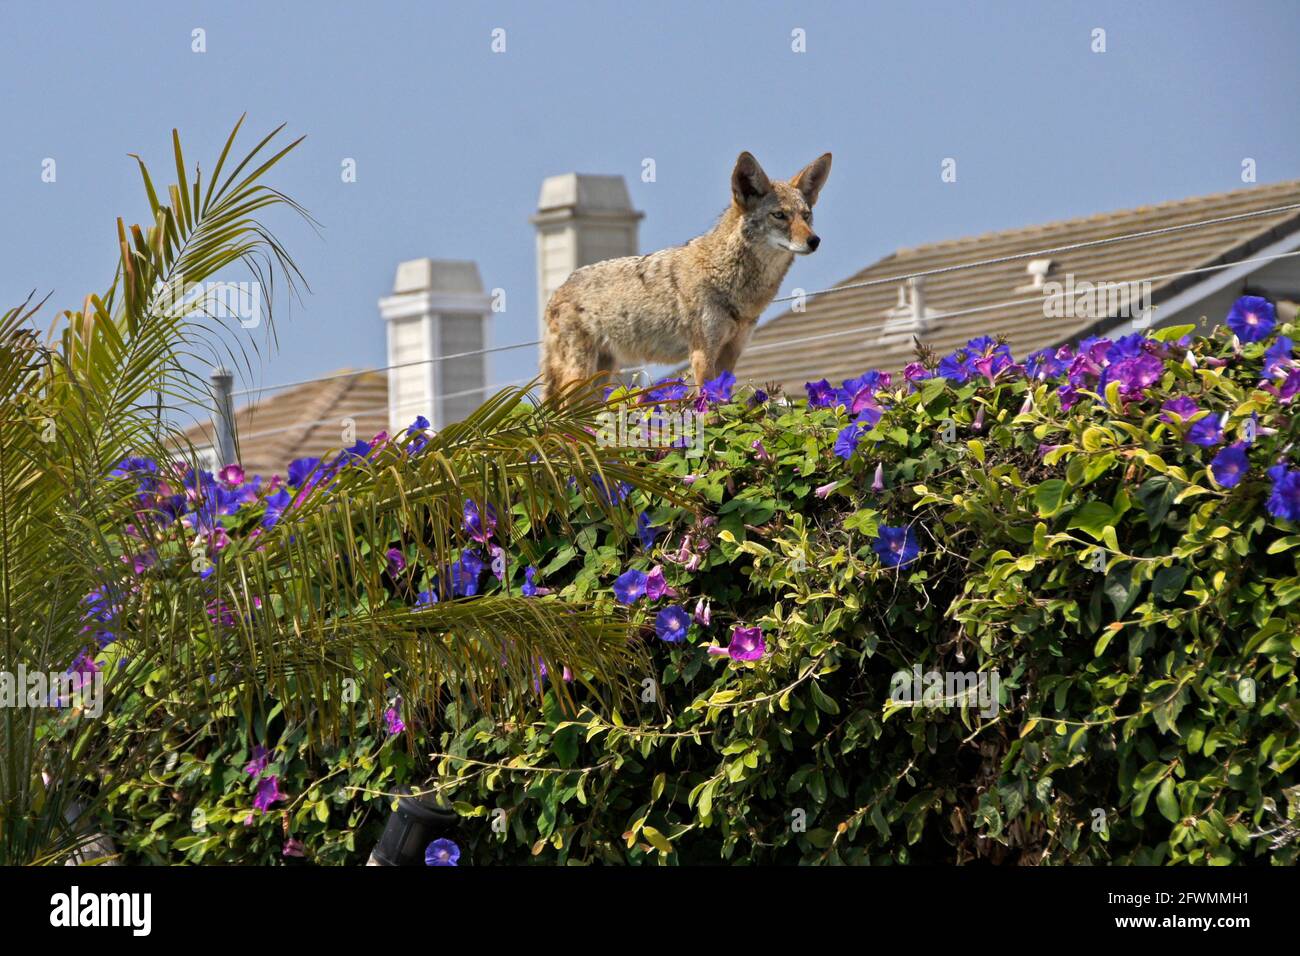 Coyote standing on top of wall covered in morning glories with two-story homes in the background, Huntington Beach, Orange County, California Stock Photo